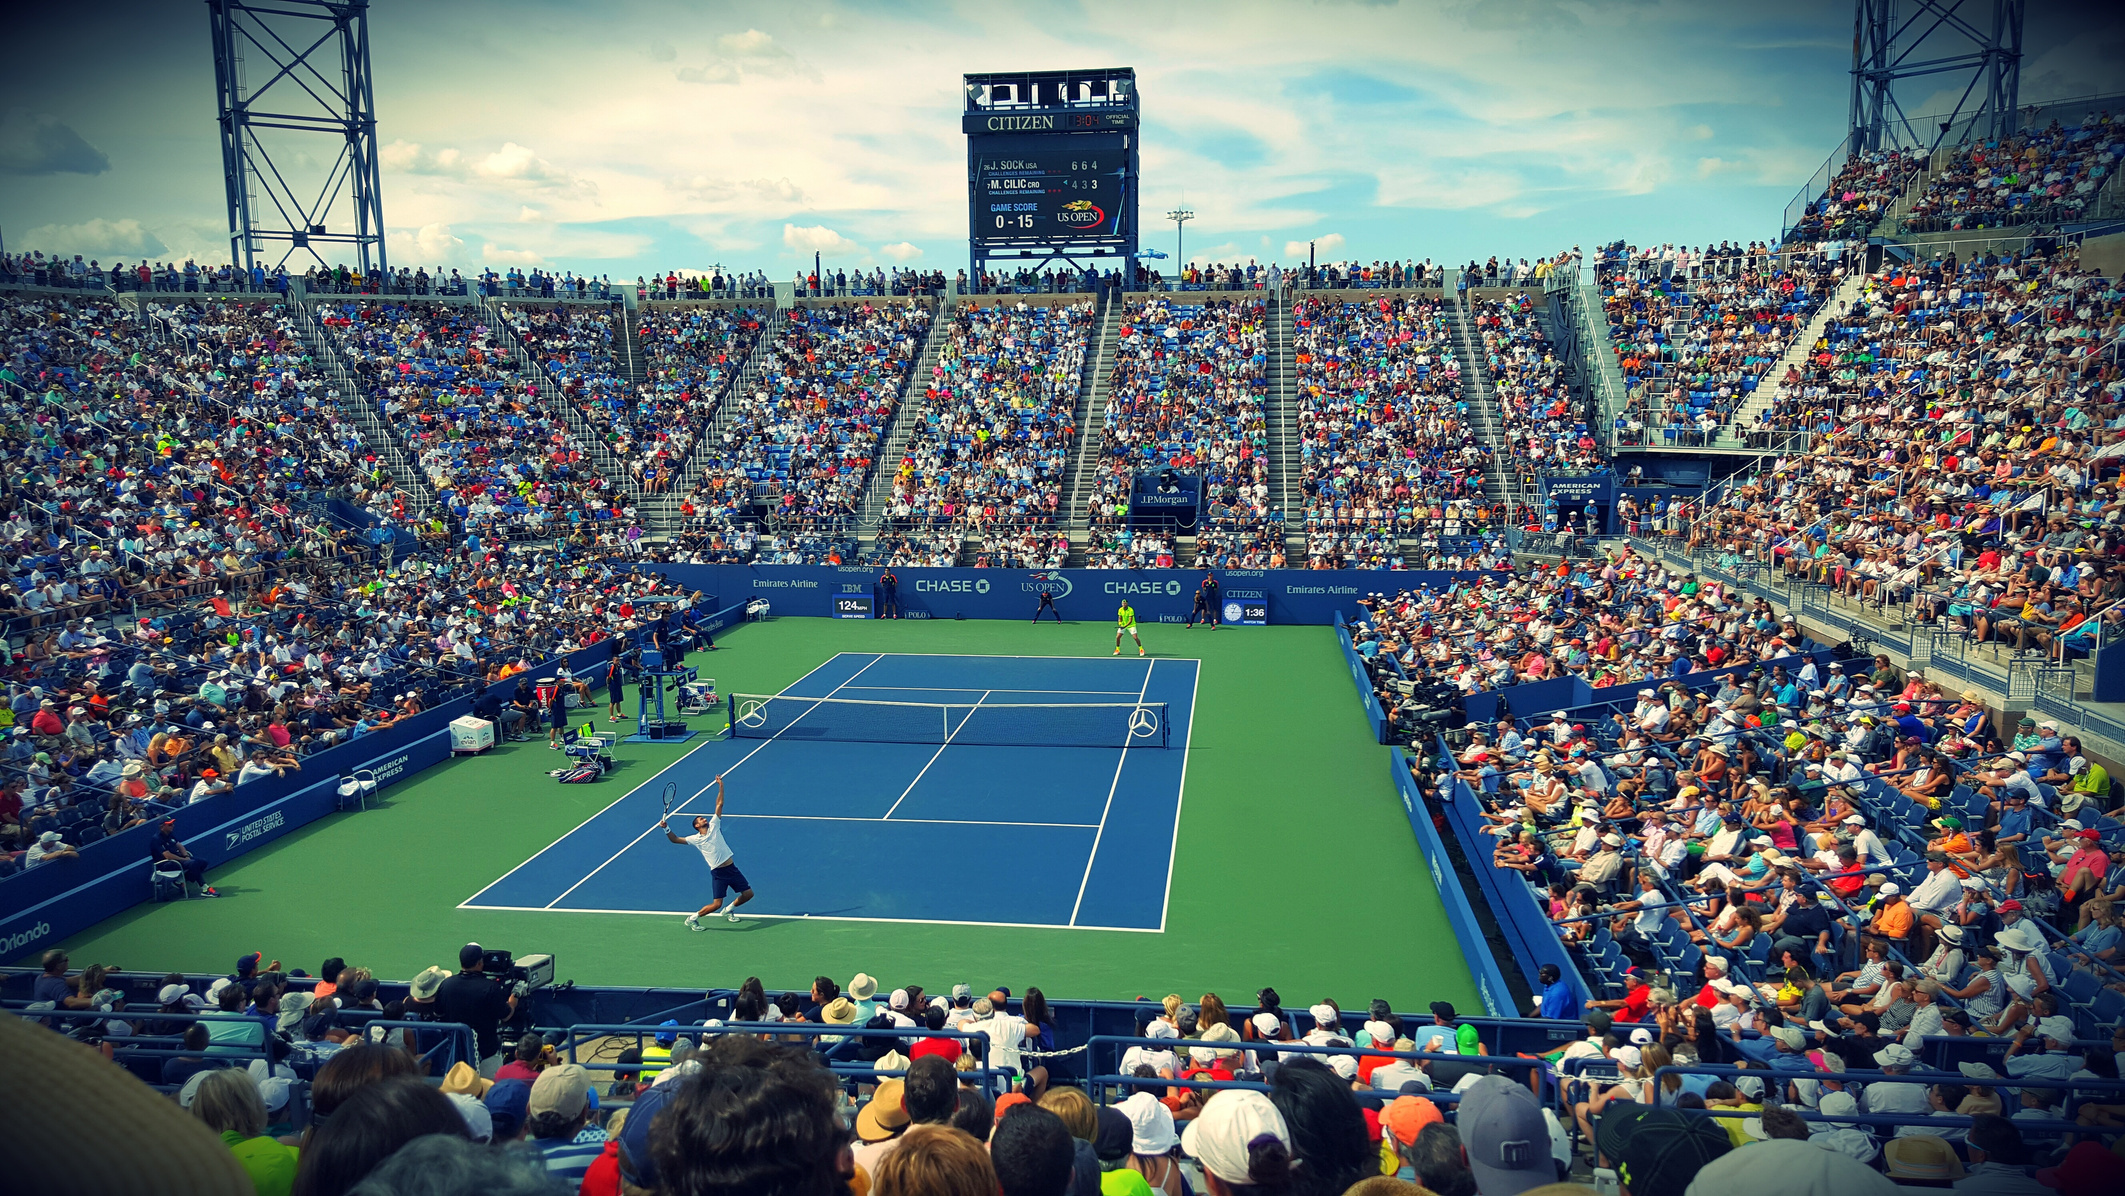 Tennis Match in a Stadium with Crowd